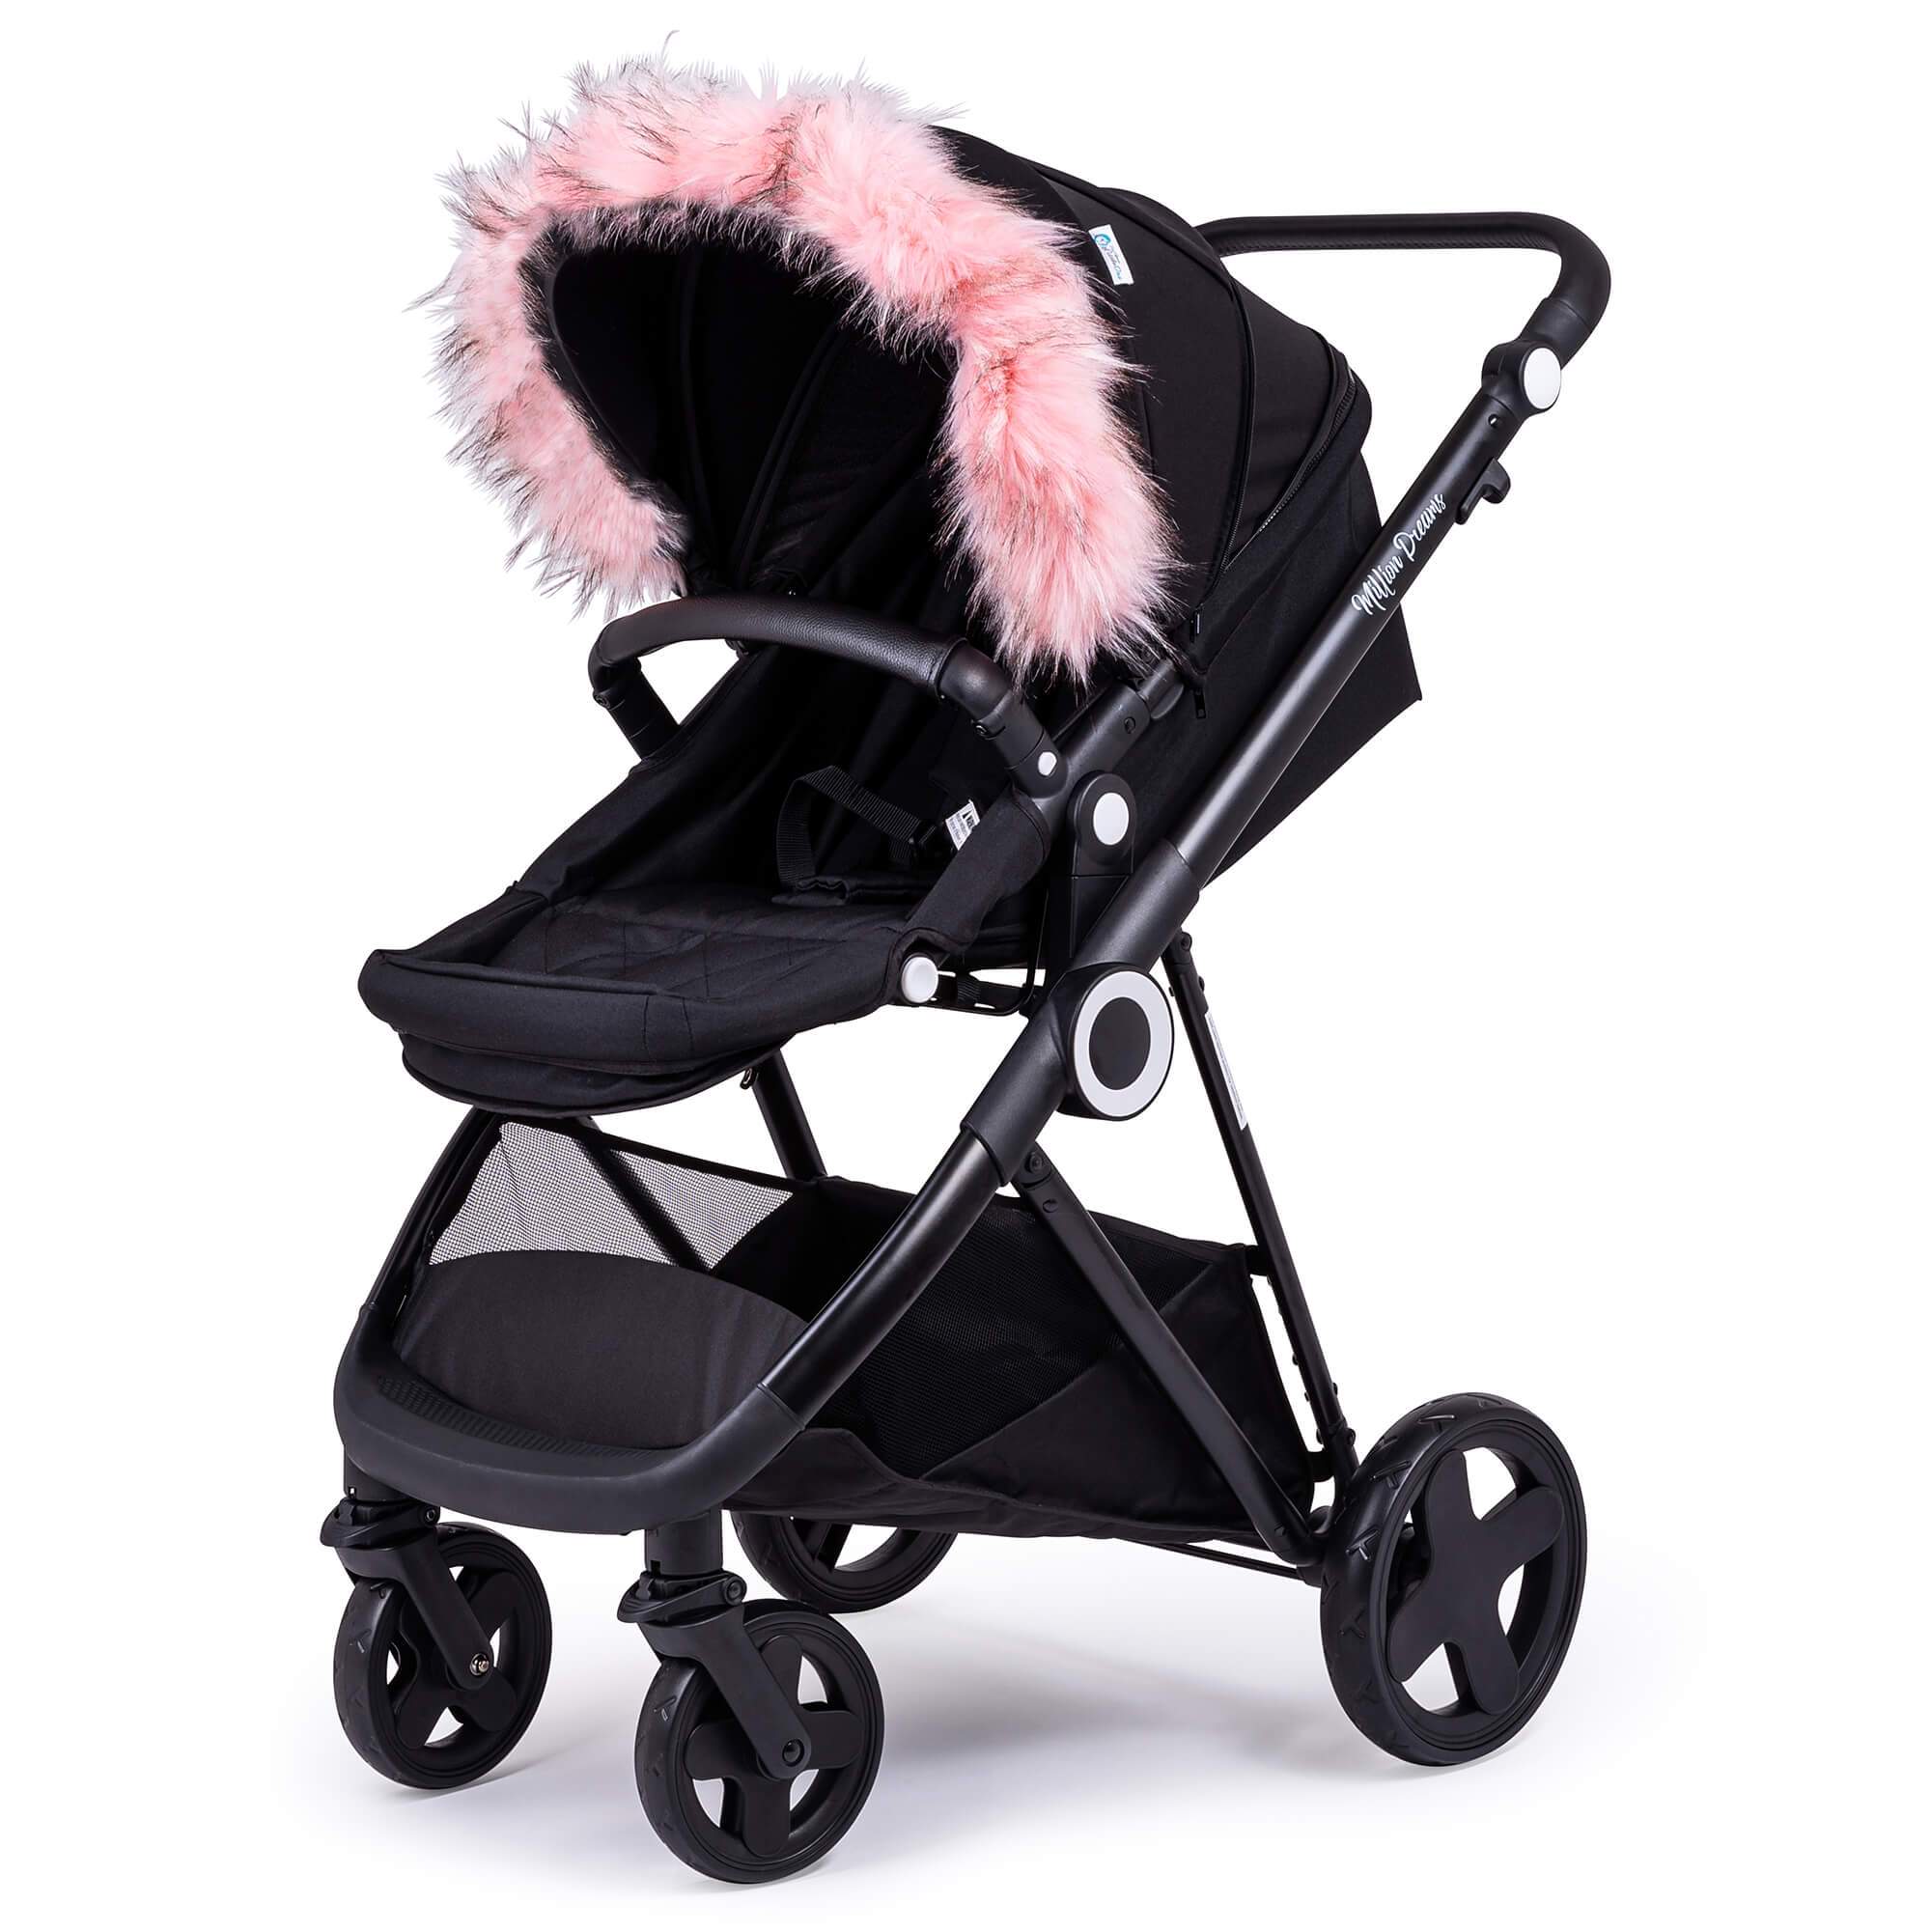 Pram Fur Hood Trim Attachment for Pushchair Compatible with BabyCare - Light Pink / Fits All Models | For Your Little One